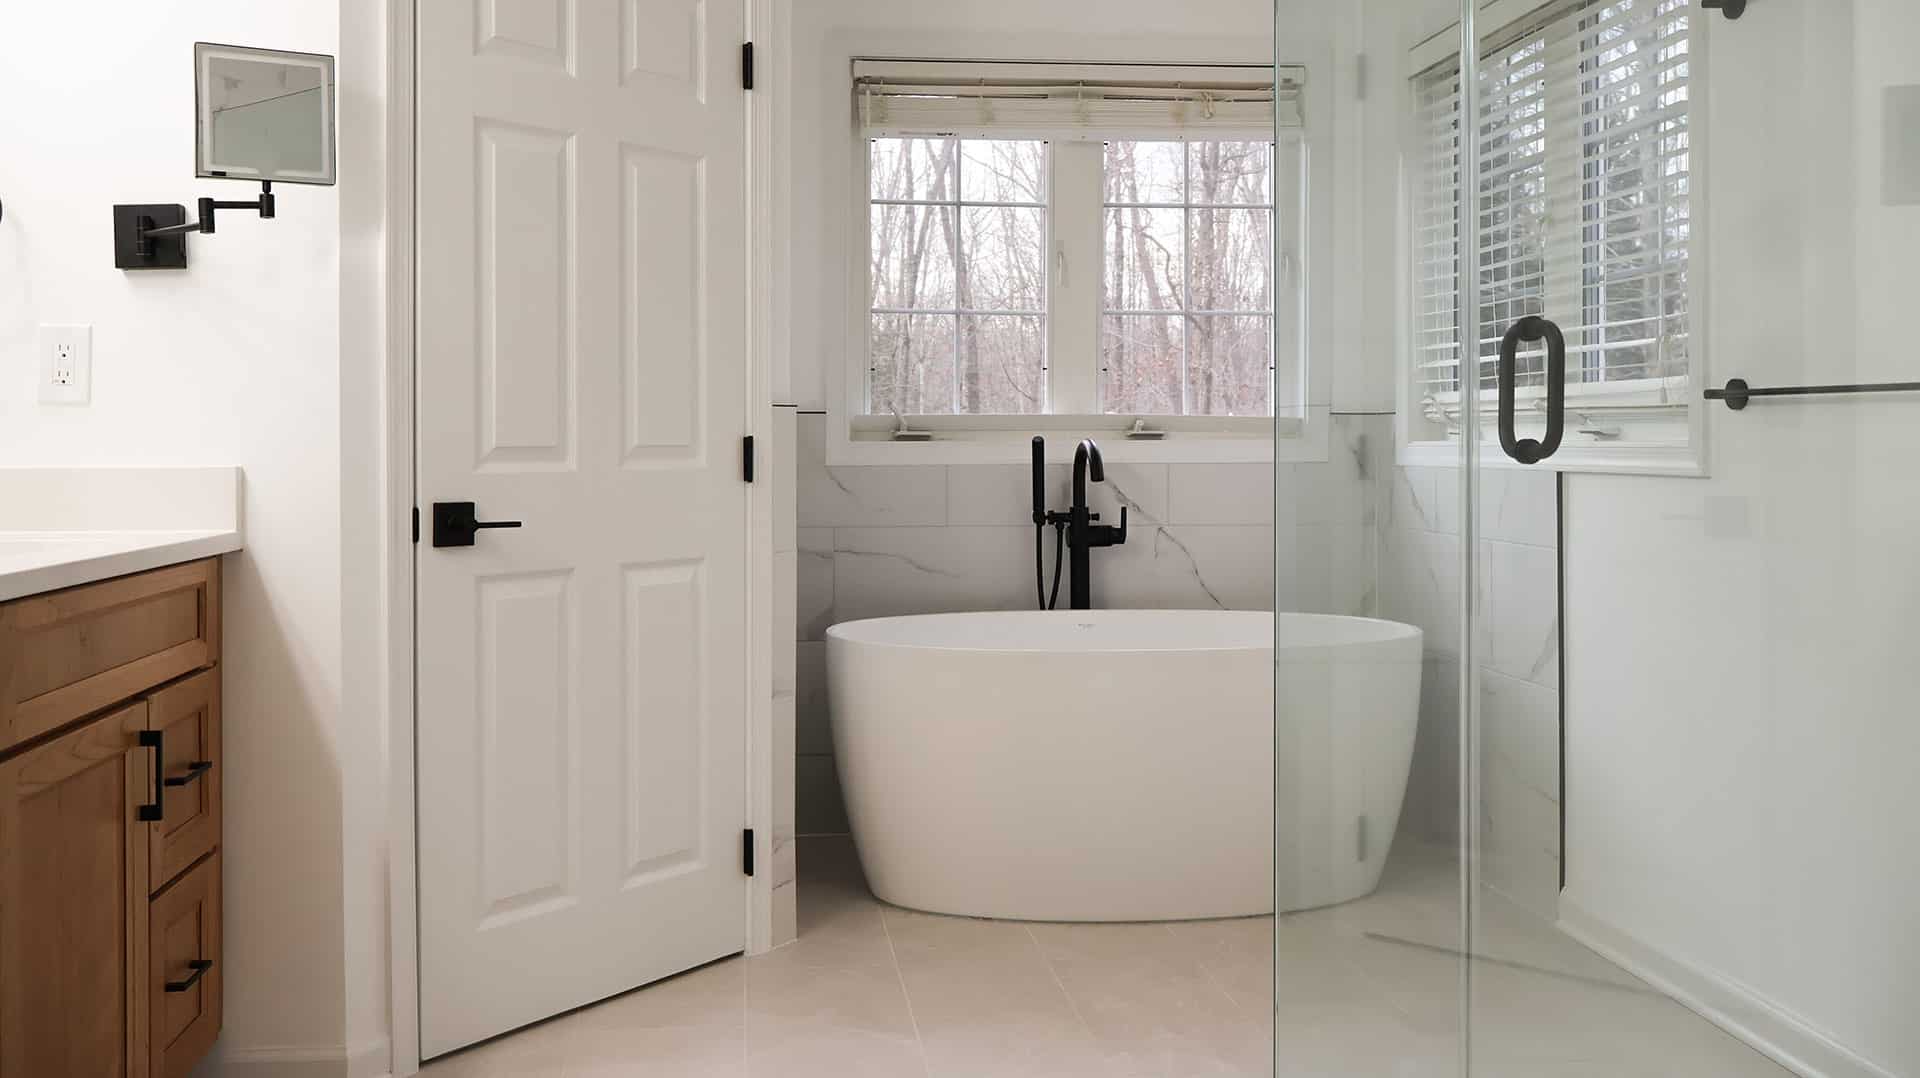 DC bathroom remodeling cost